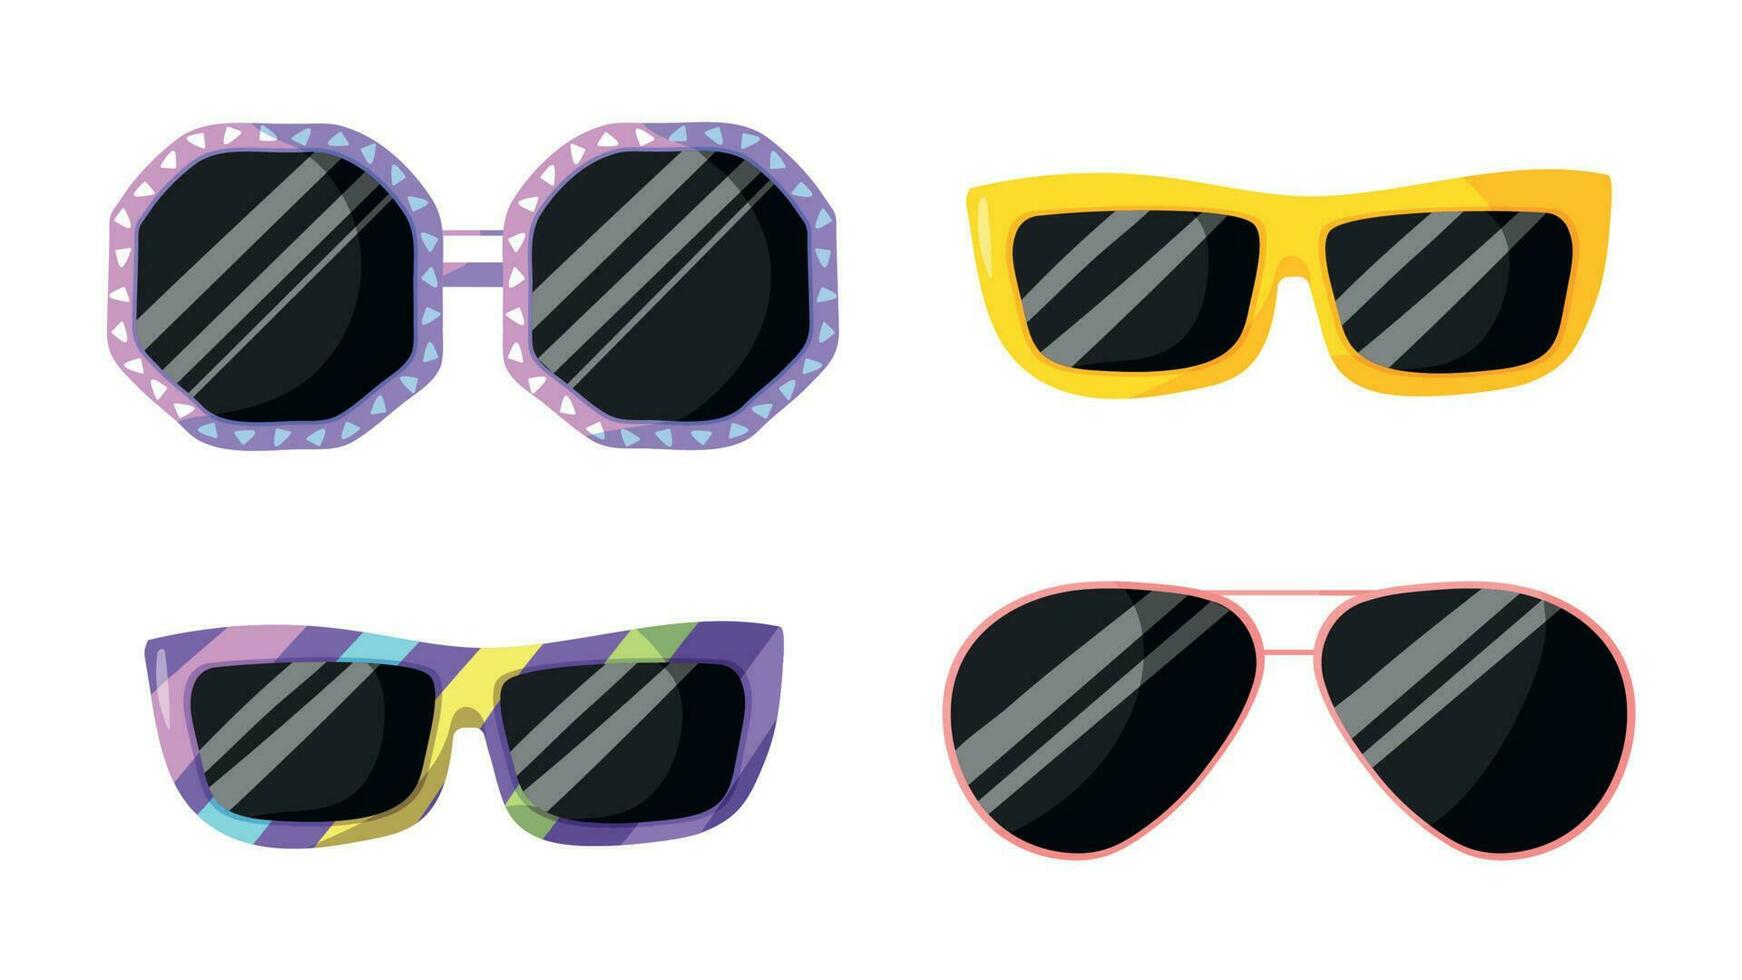 Set of fashionable sunglasses different shape and color. Collection of modern and vintage accessories protection from sunshine isolated on white background vector